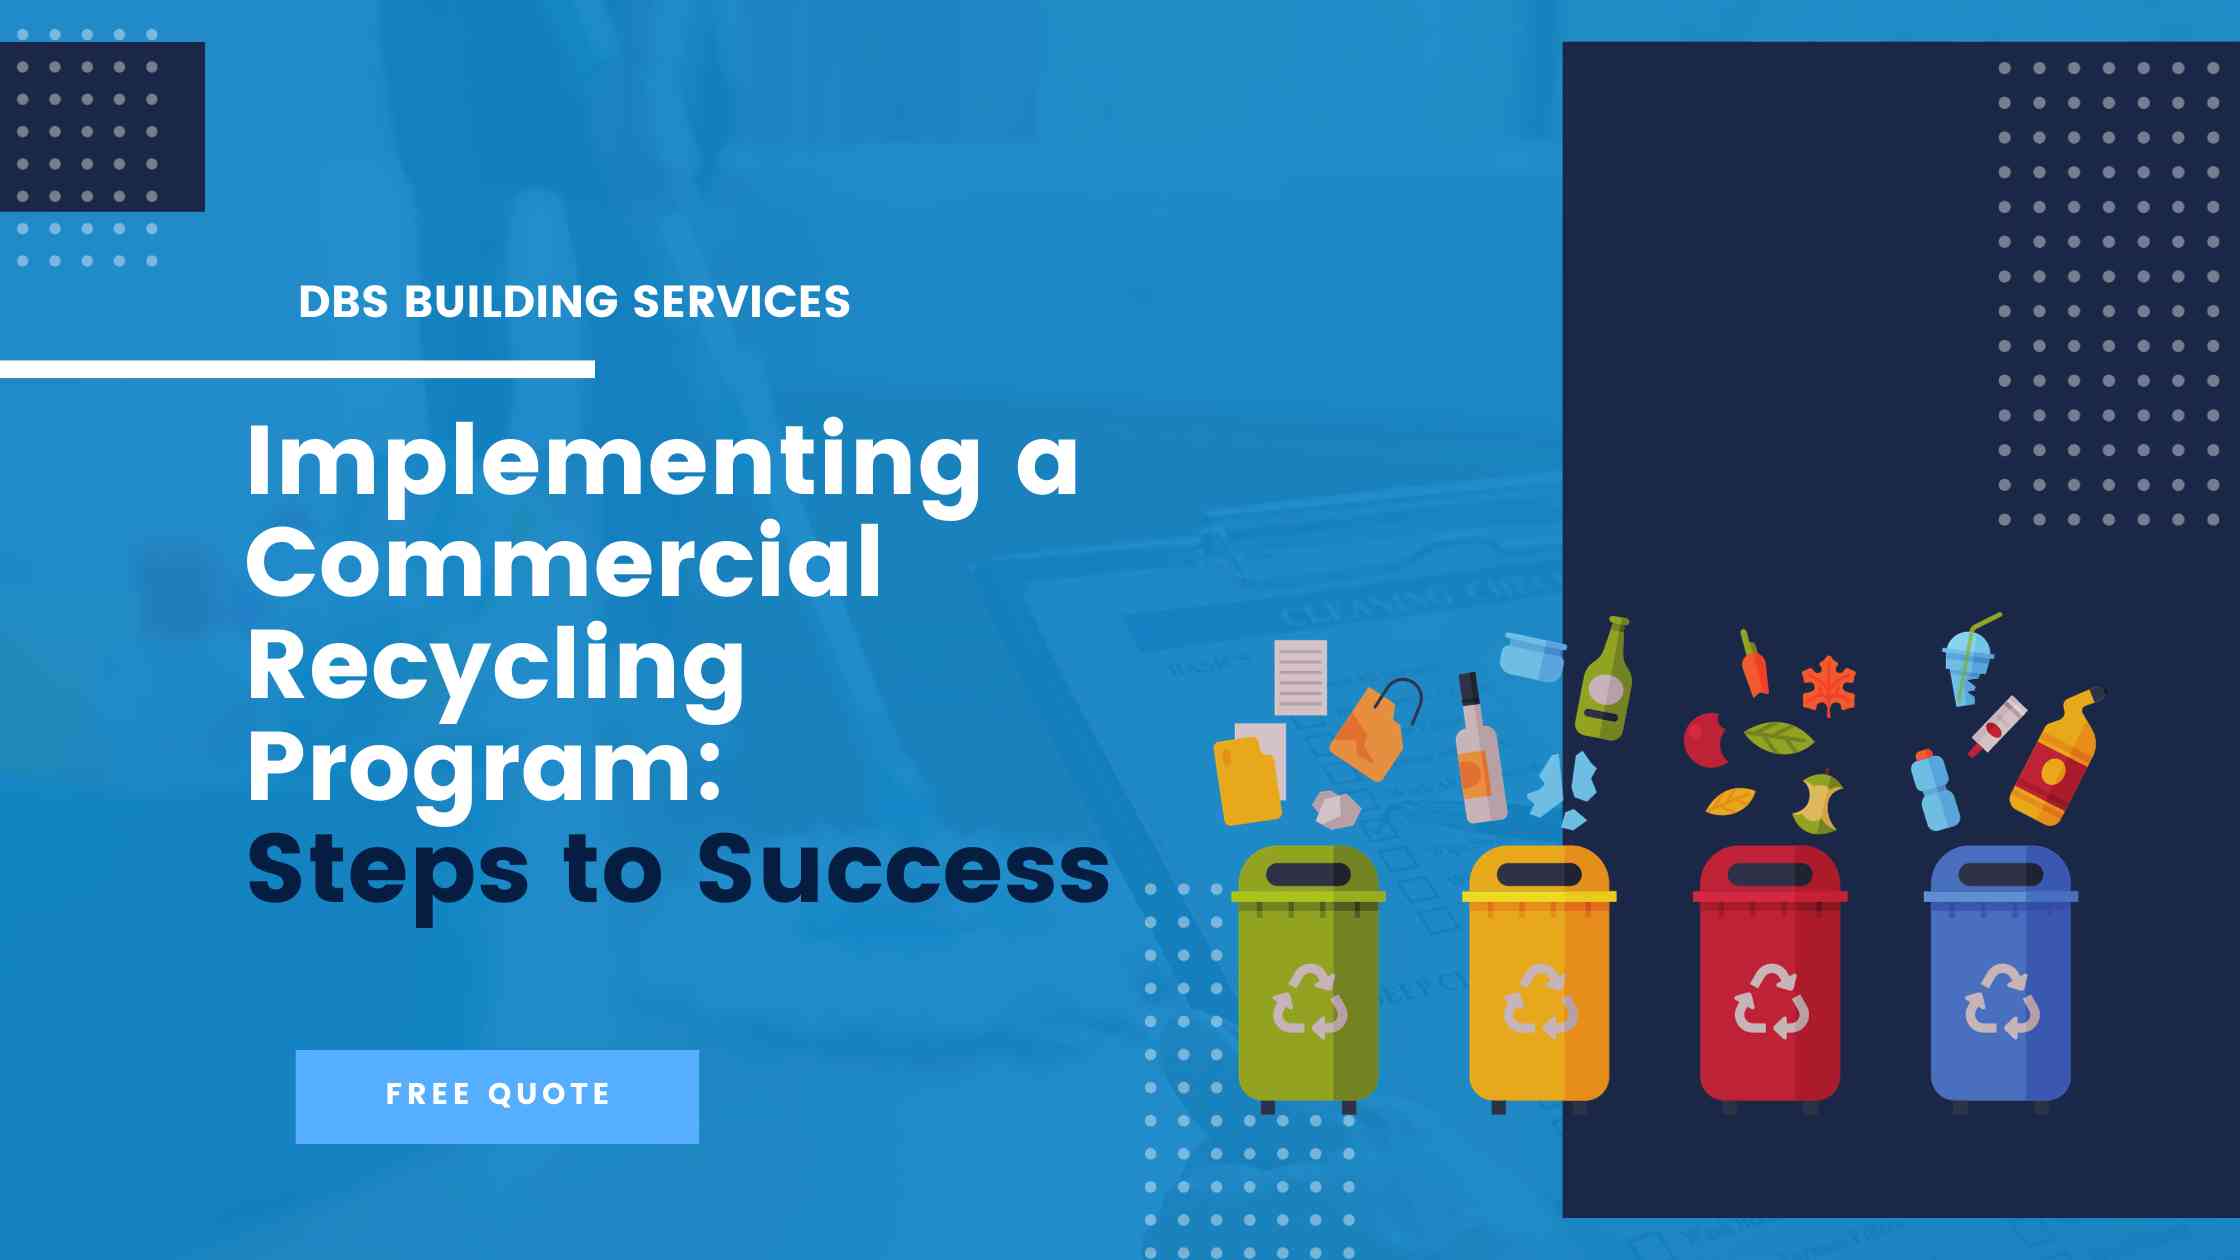 Commercial recycling program implementation